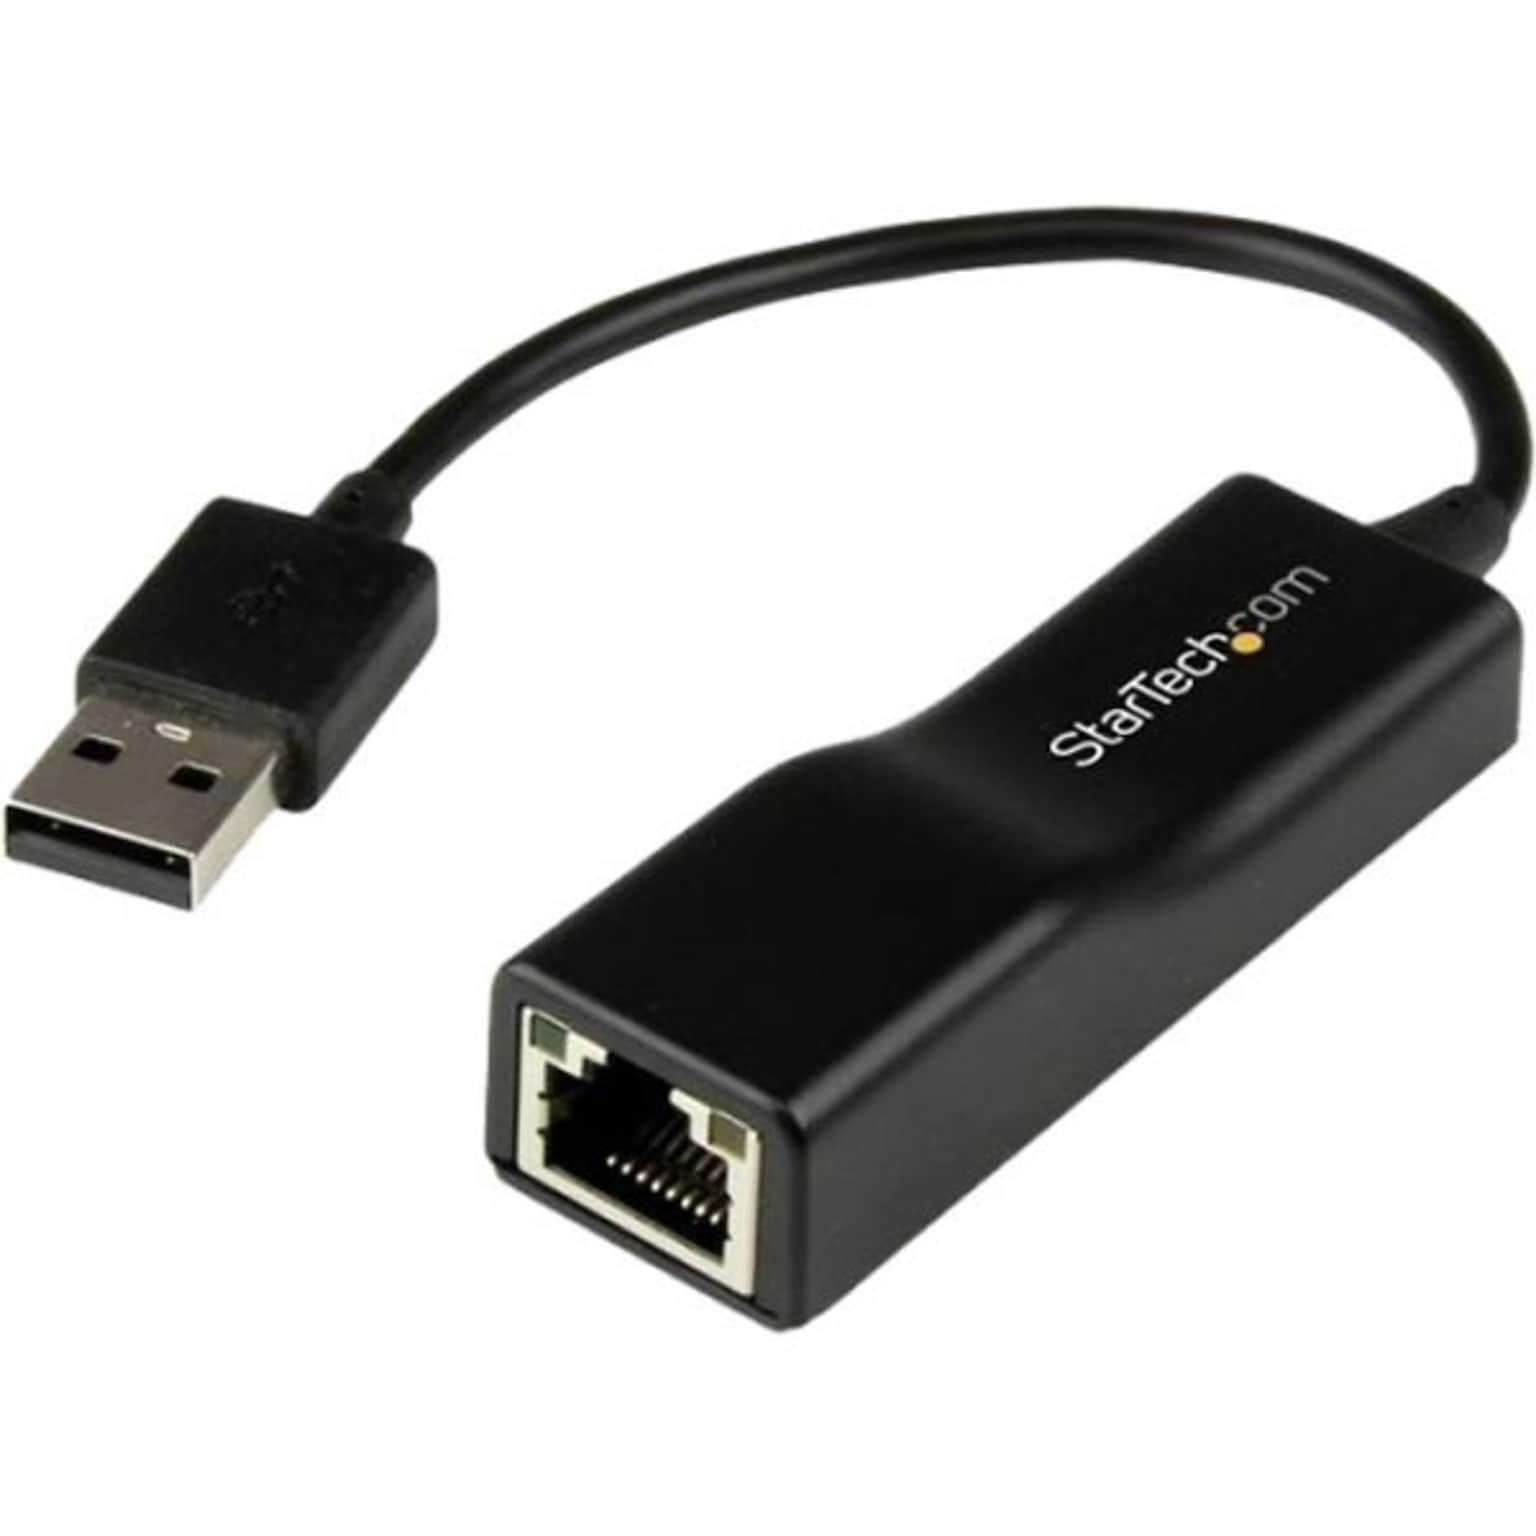 Startech USB 2.0 to 10/100 Mbps Ethernet Network Adapter Dongle